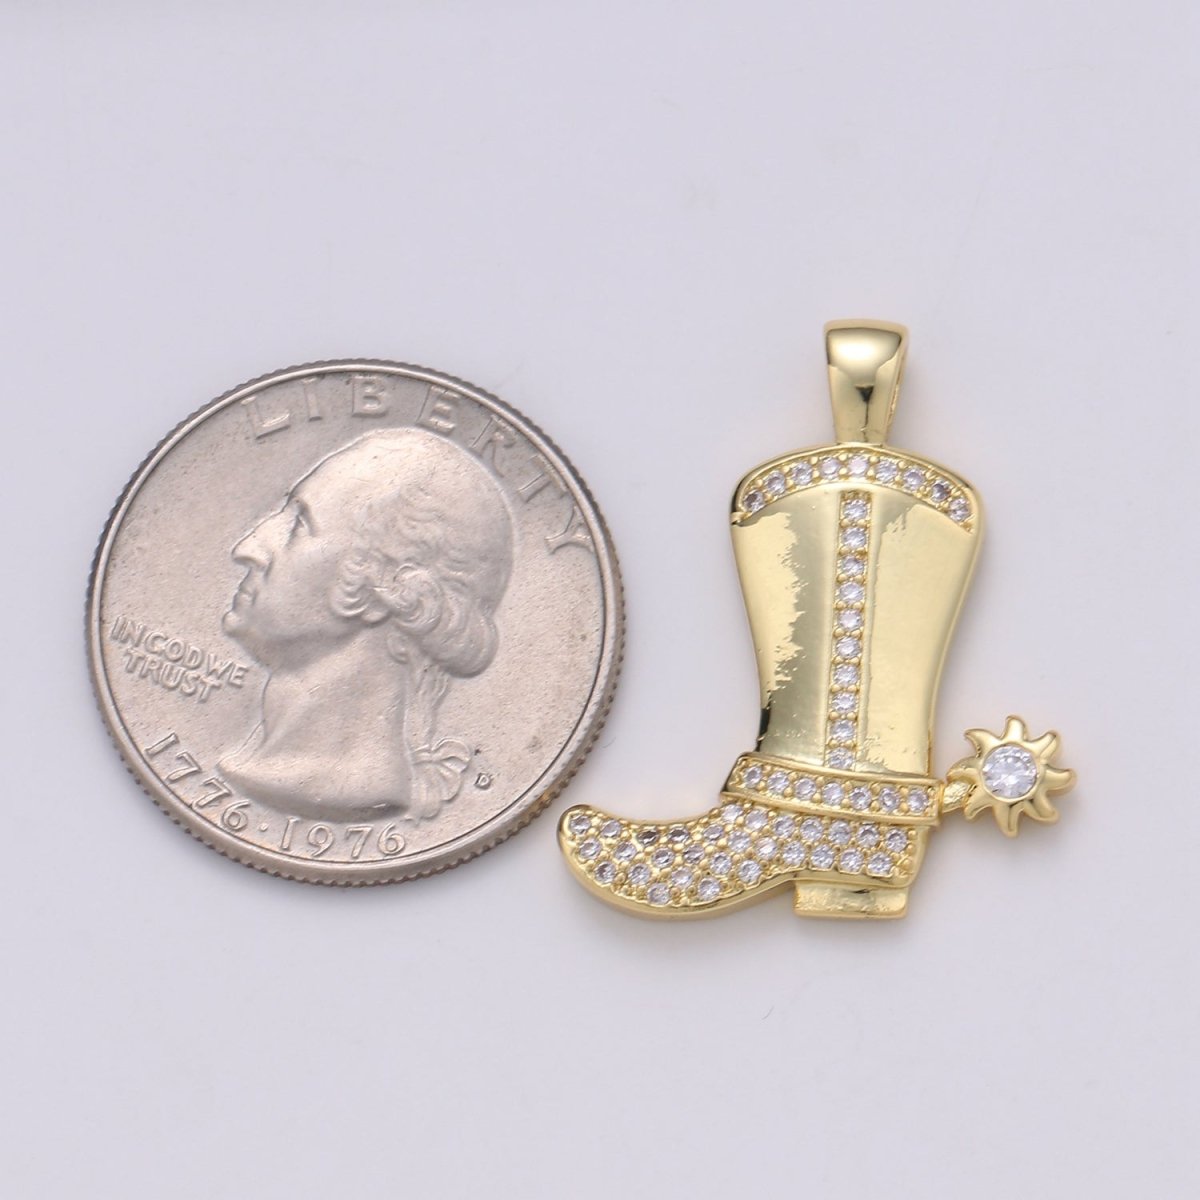 28x23mm Wholesale Gold-Filled Gold or Silver Cowboy Boot Pendant Charm with Rhinestones, Pendant for Necklace Bracelet Anklet Making J-150 J-151 - DLUXCA